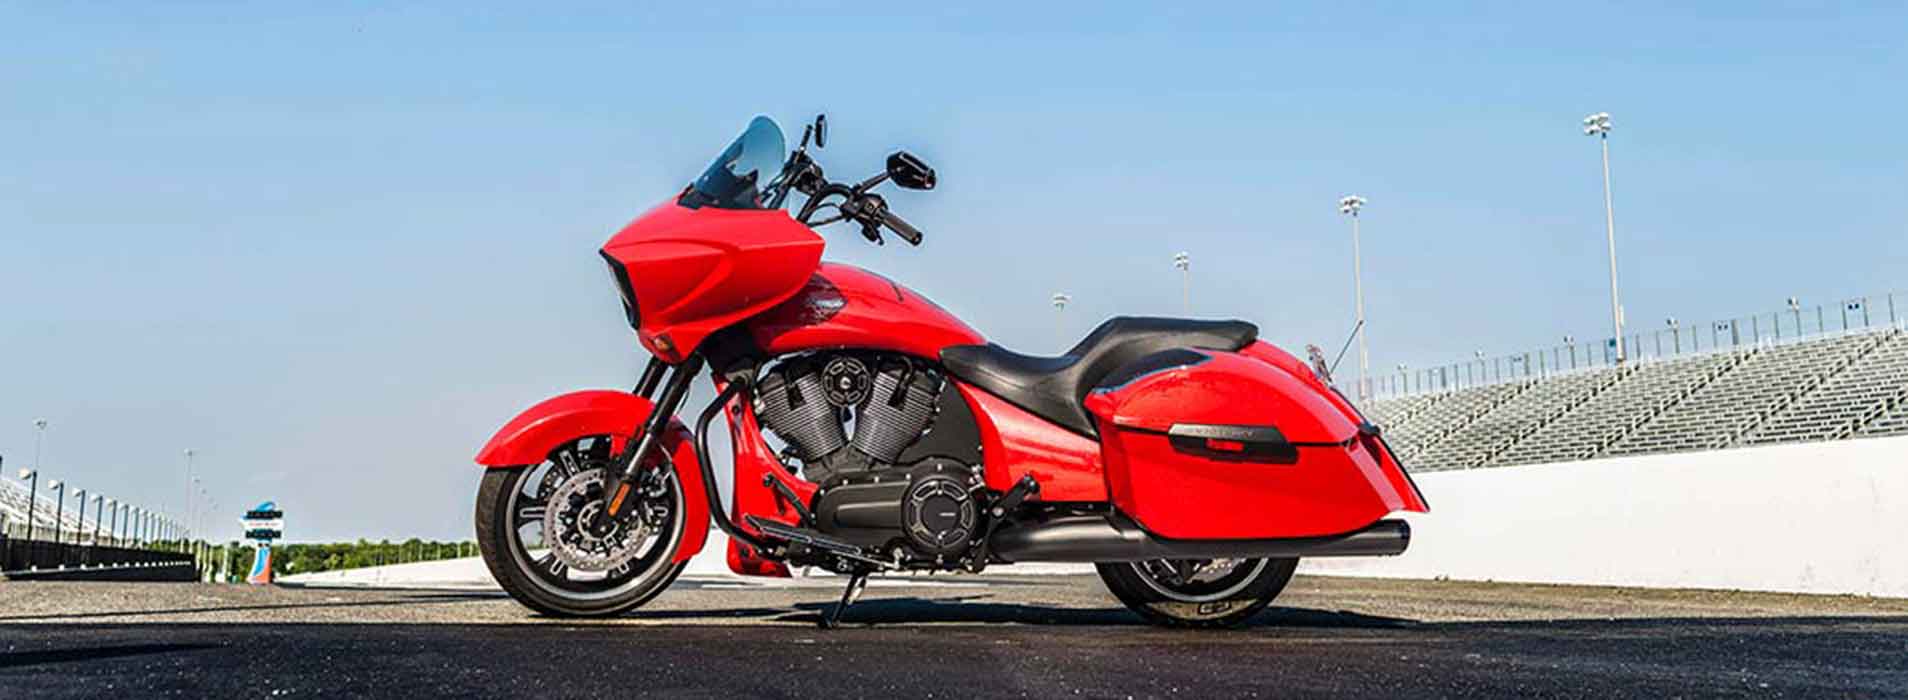 Victory Motorcycles - Cross Country 2016